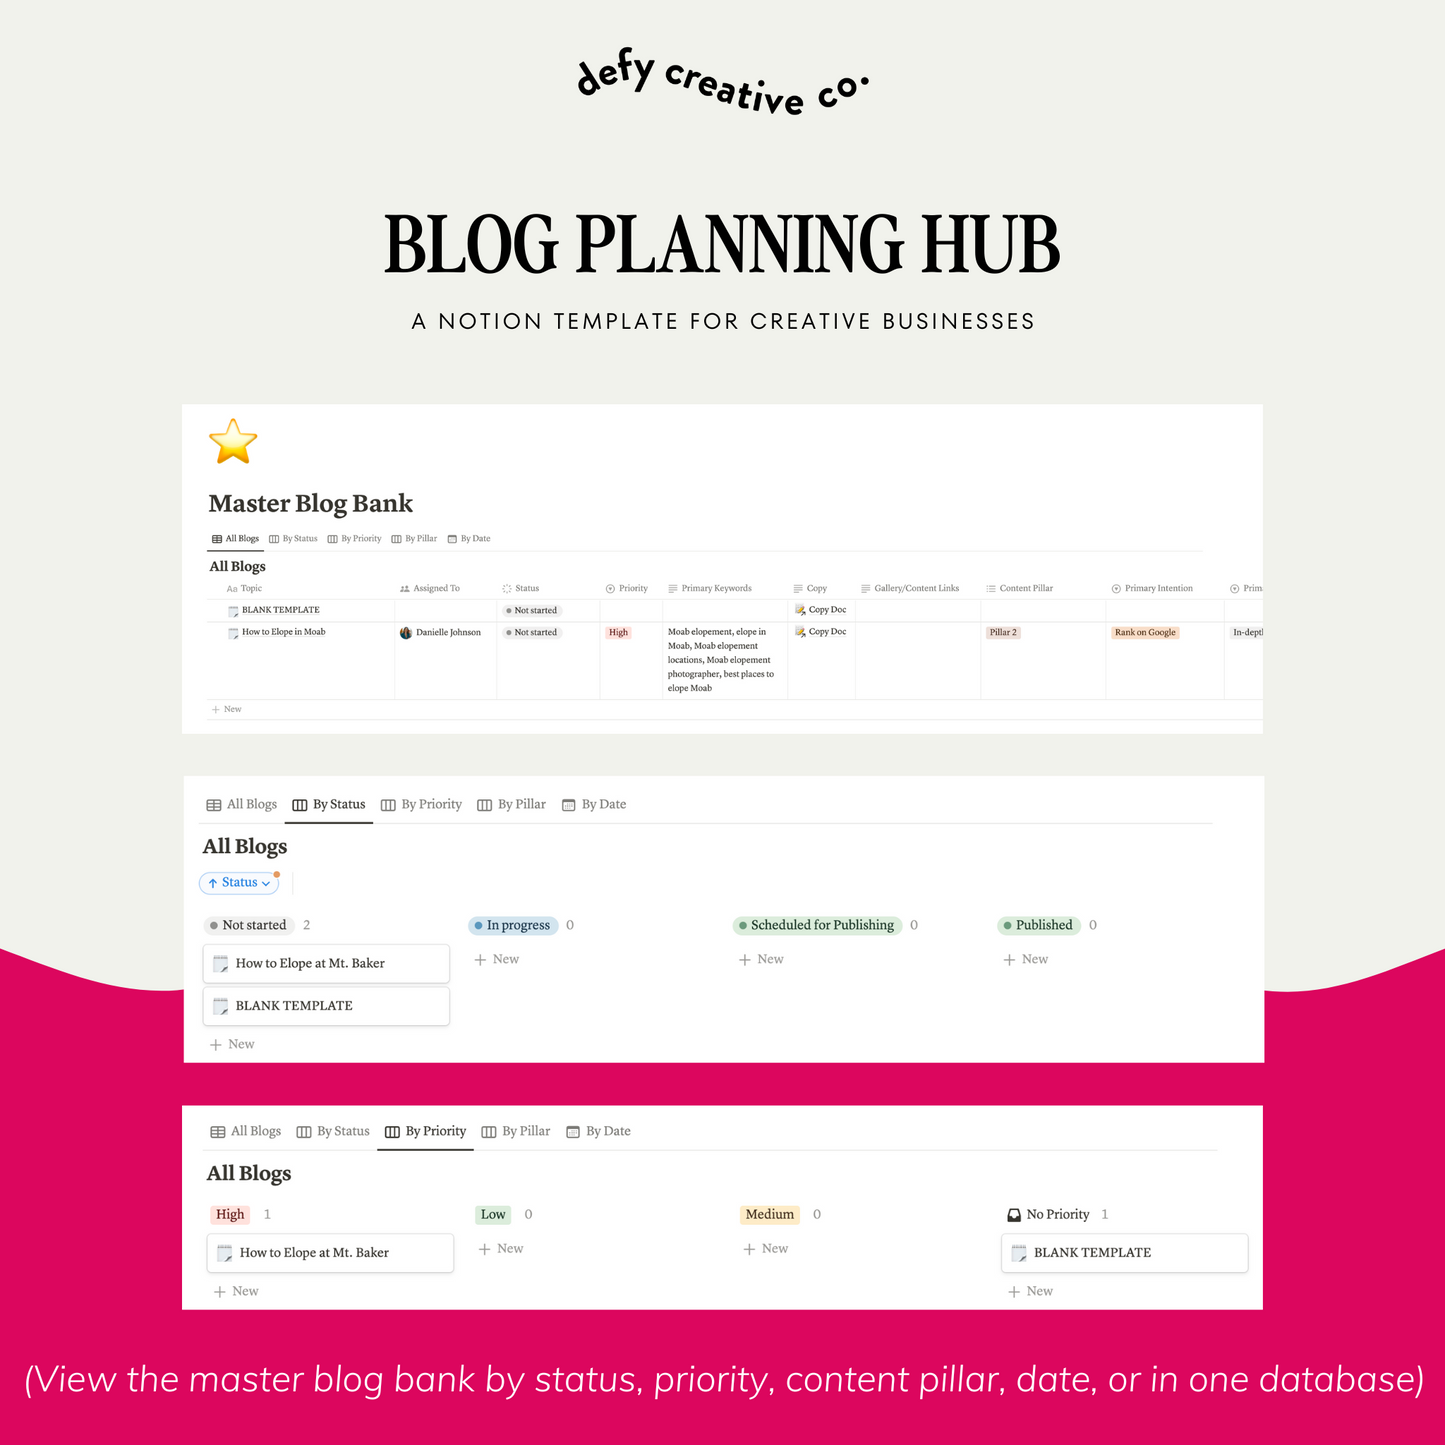 The Blog Planning Hub: Notion Template